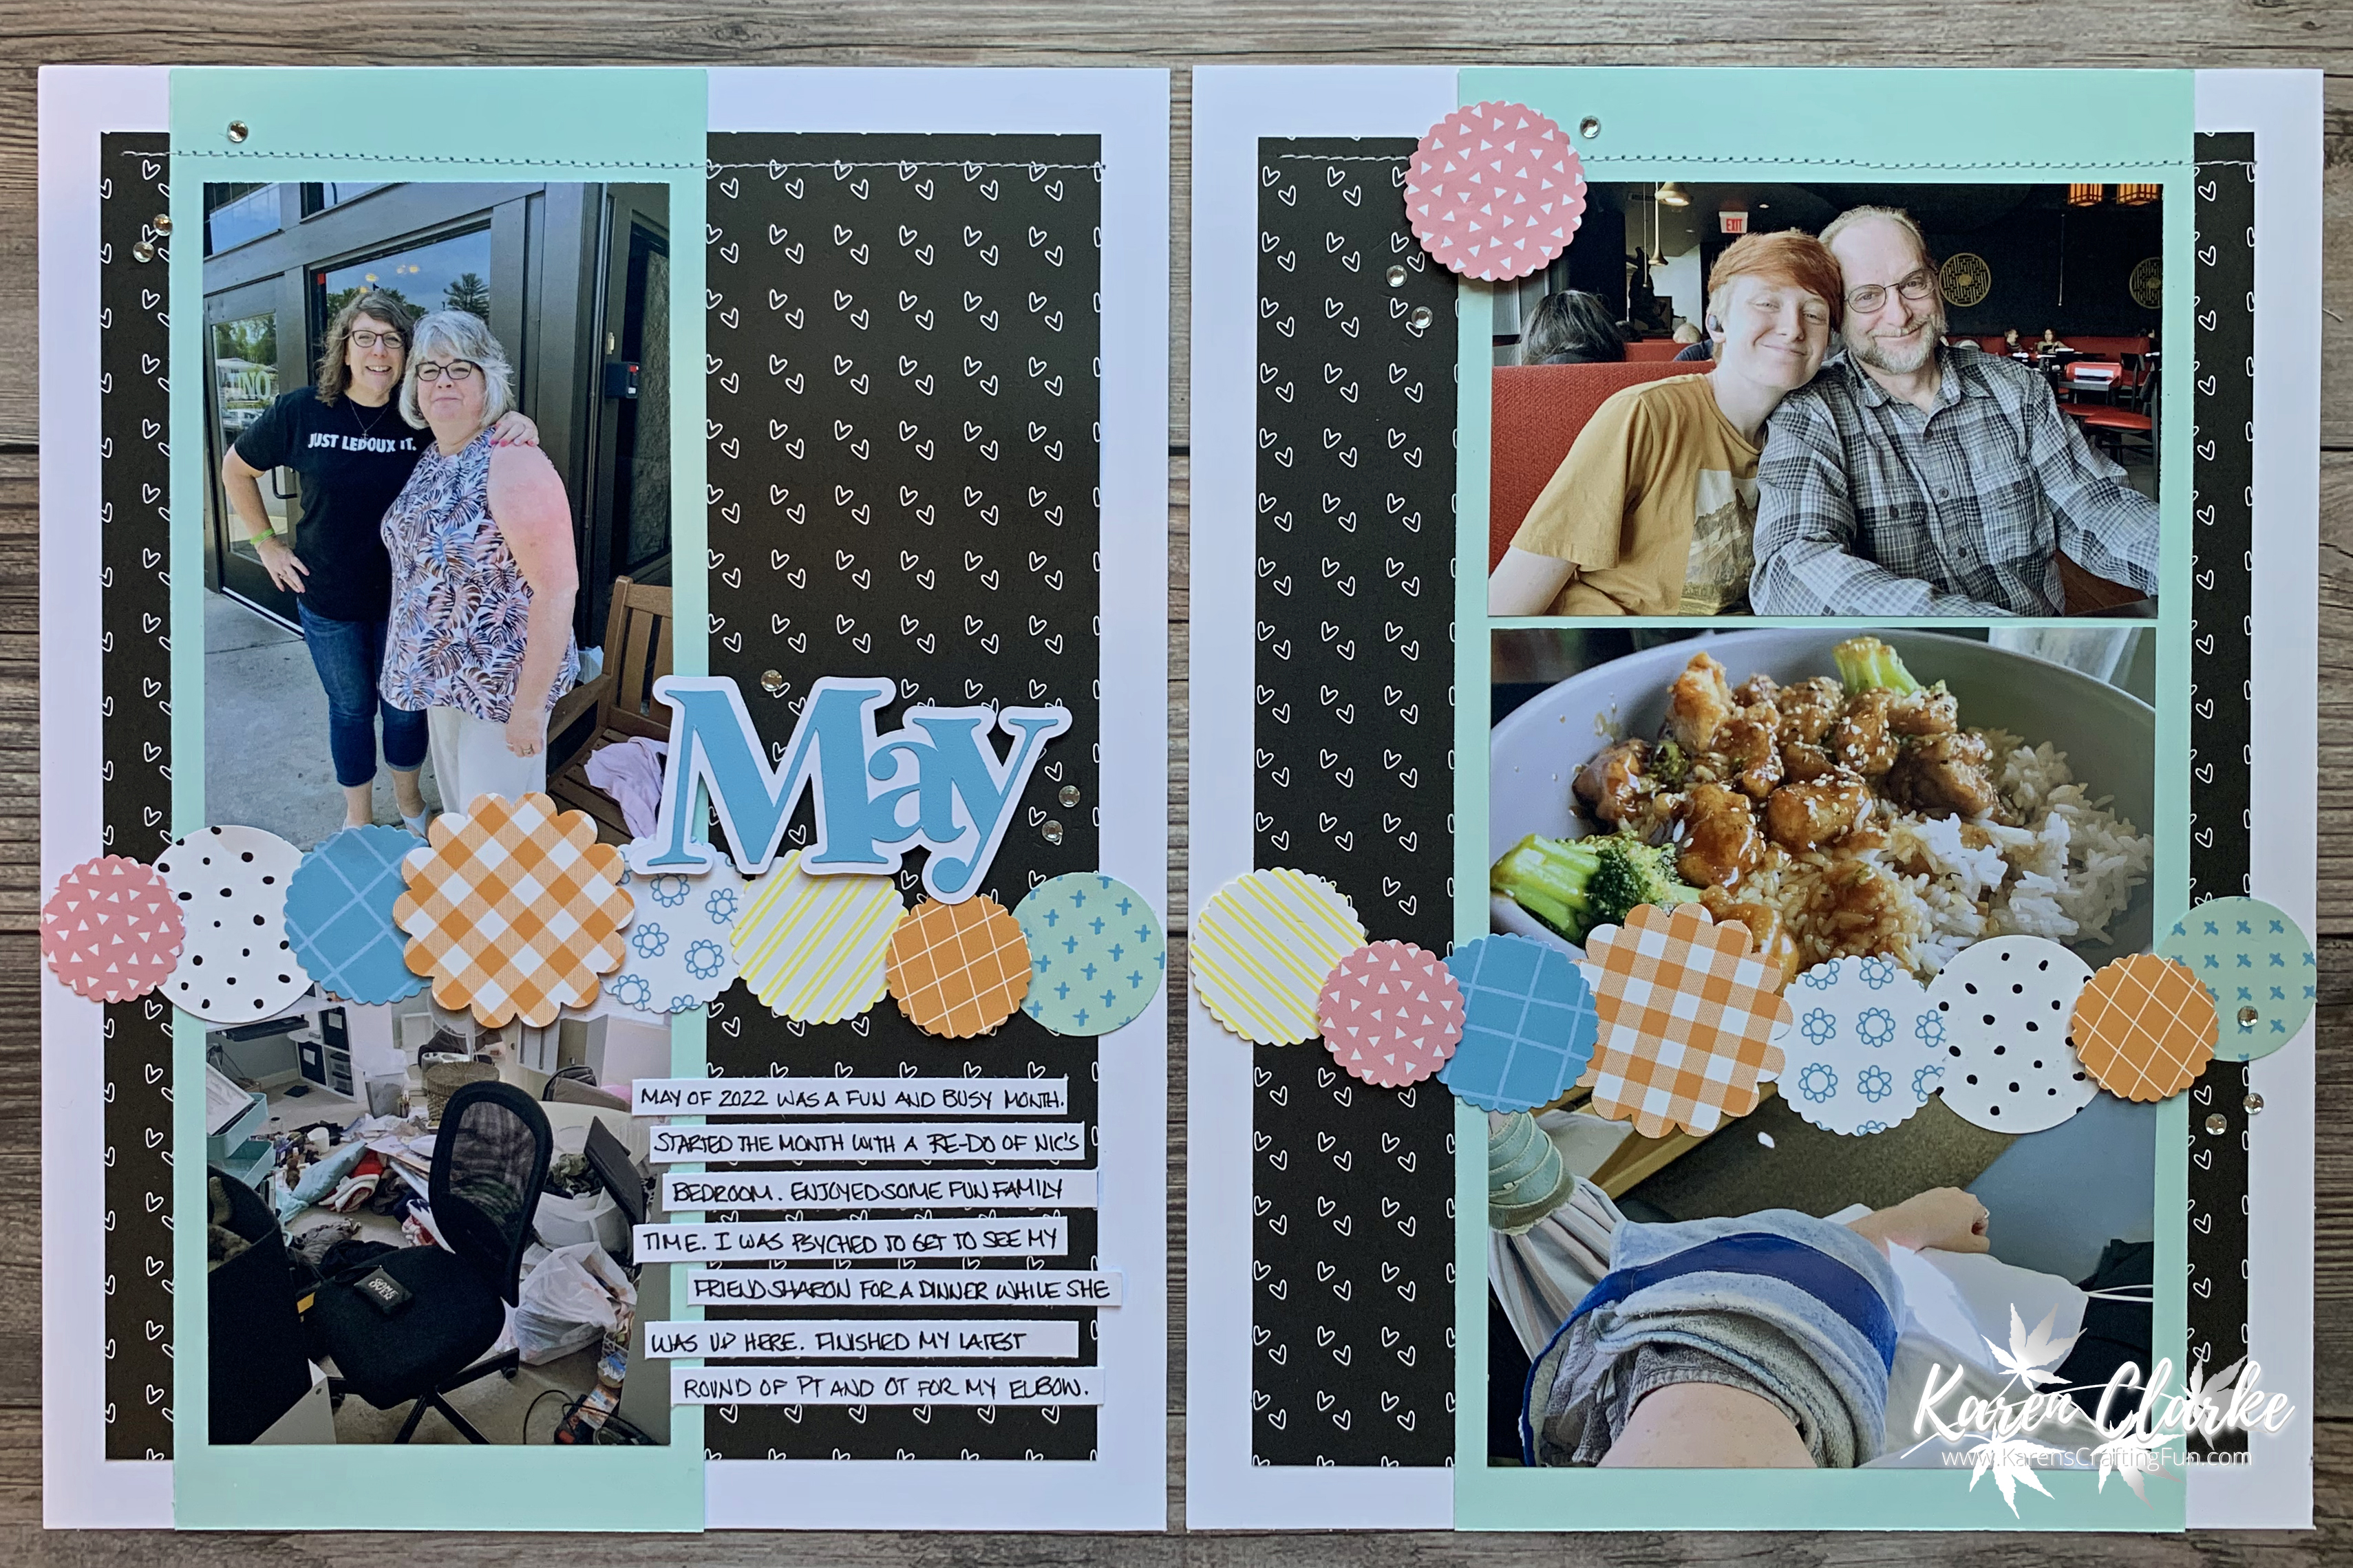 12 Scrapbook Design Ideas That Will Inspire You to Craft Today